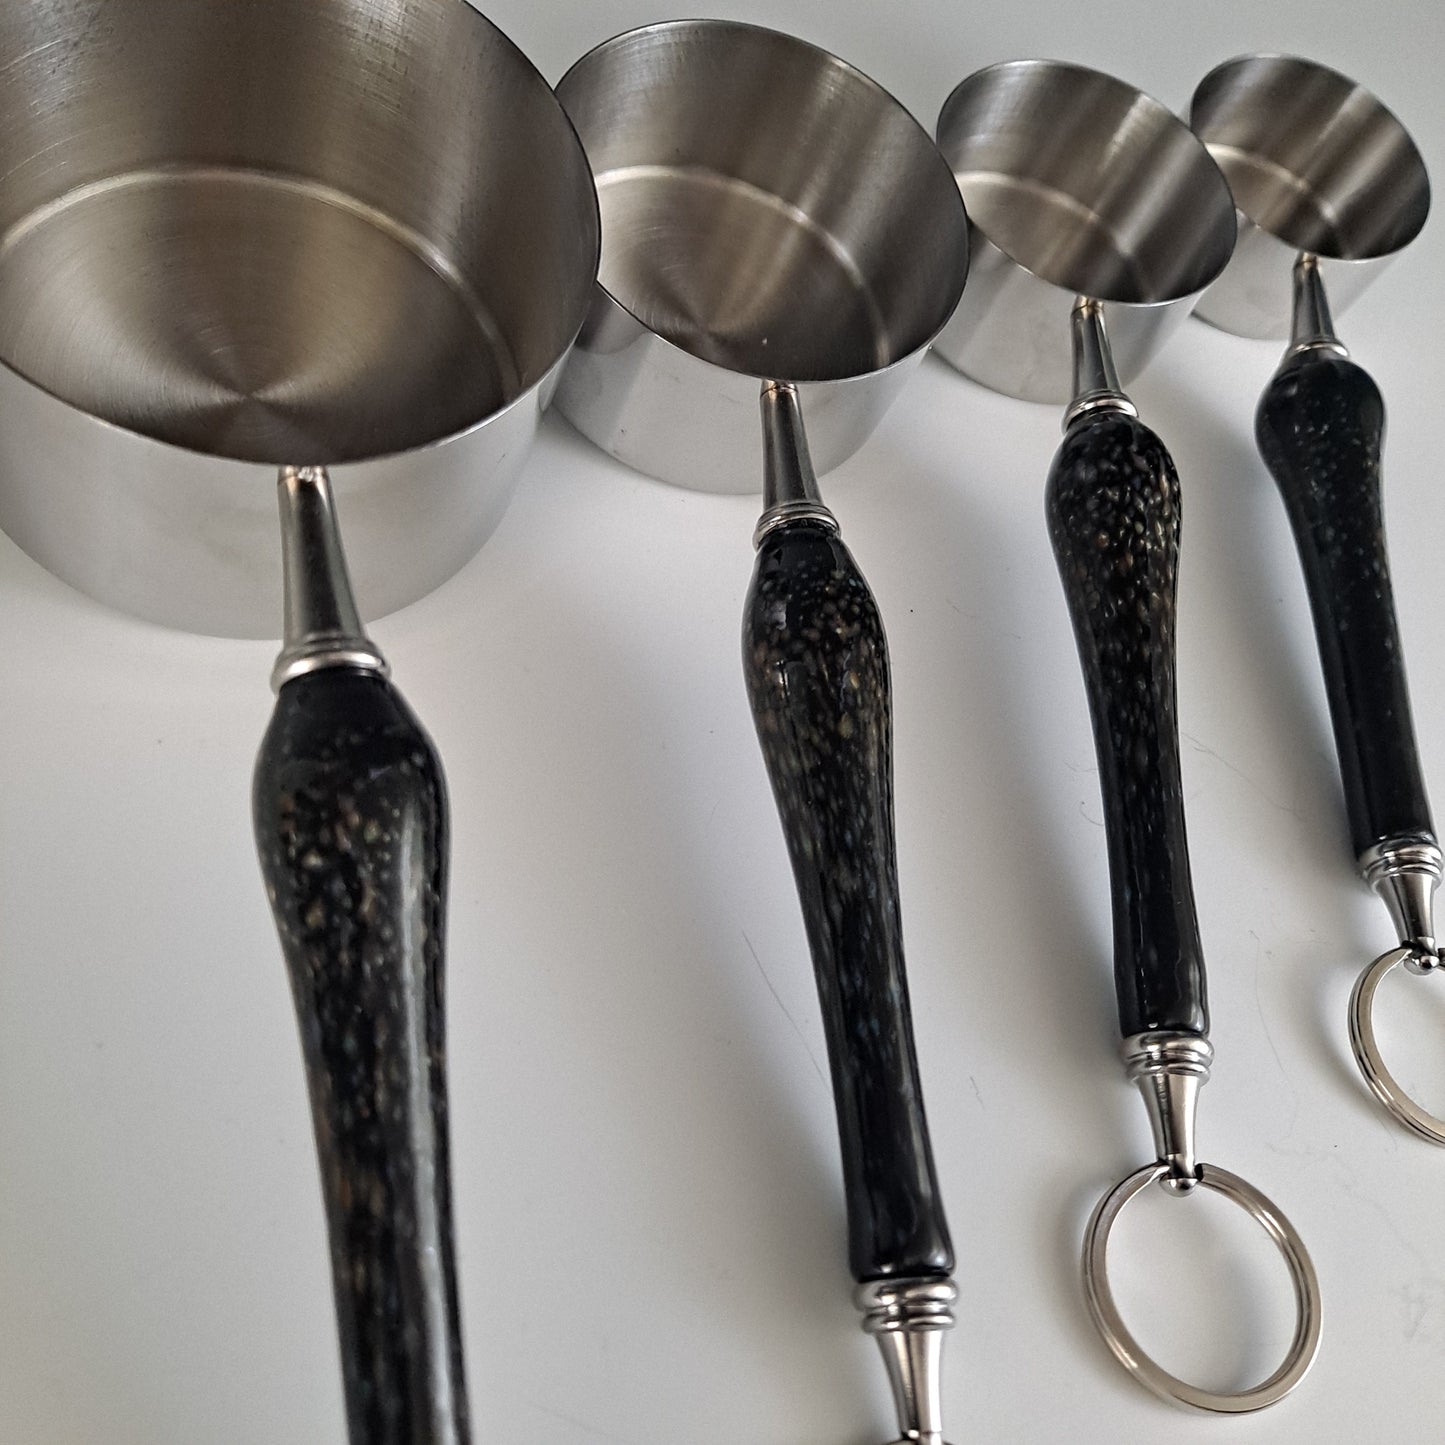 Kitchen Accessories, Measuring Cups with Black Glass Handles, #A0144, Ready to Ship